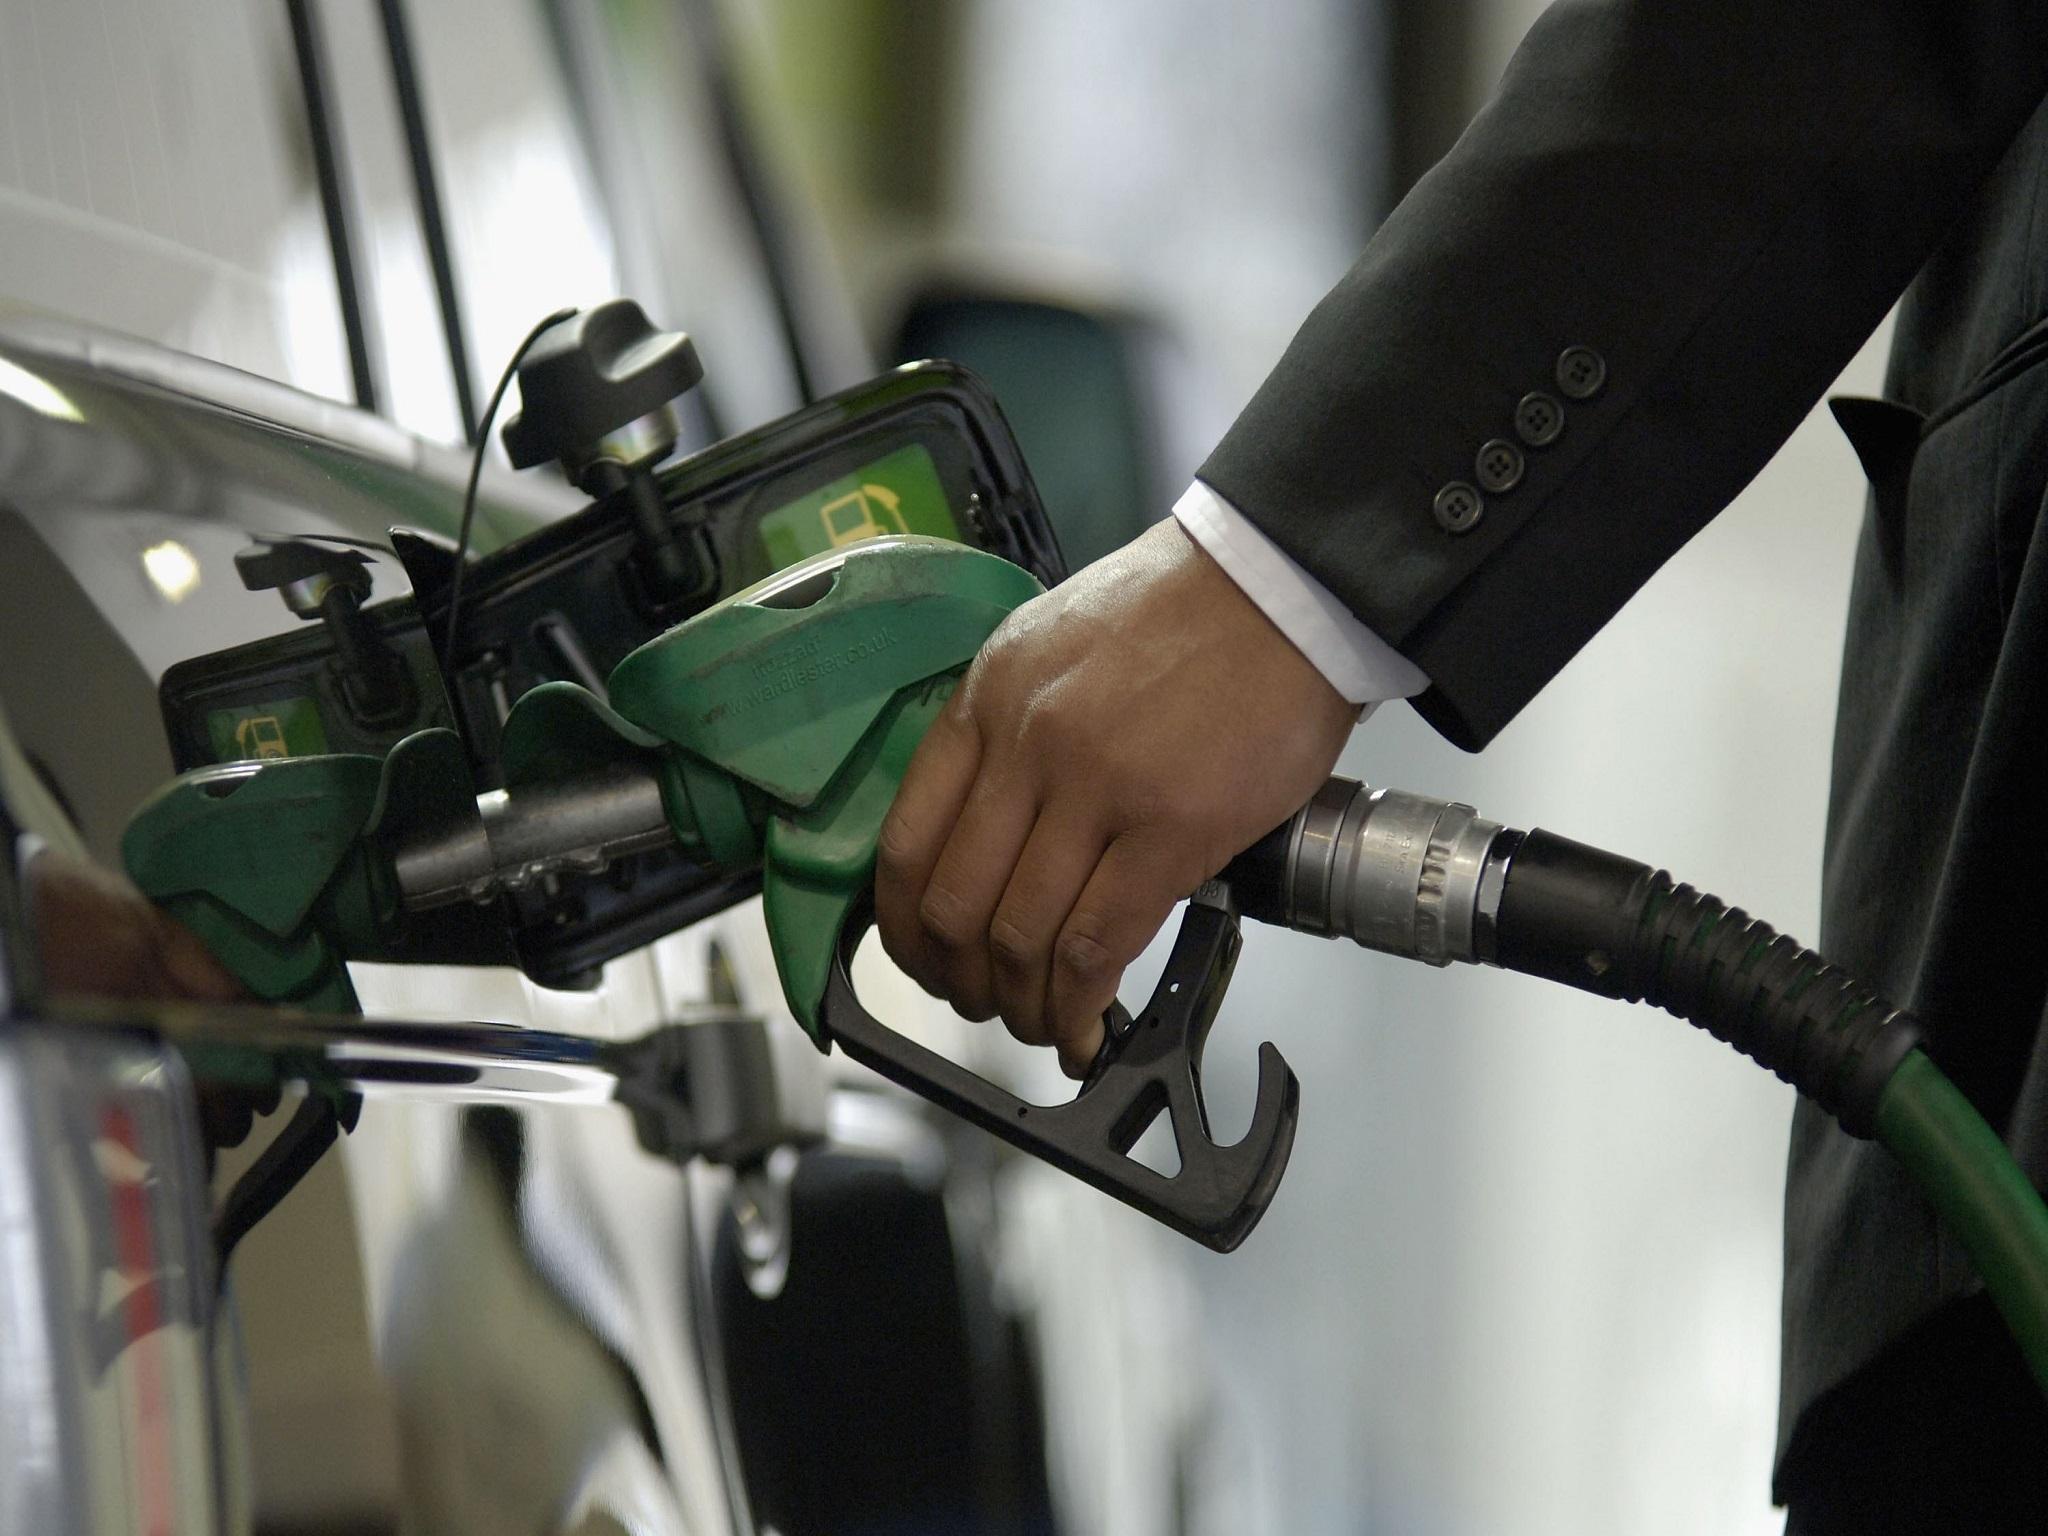 The price of a litre of unleaded petrol is expected to rise by up to 4p per litre next week